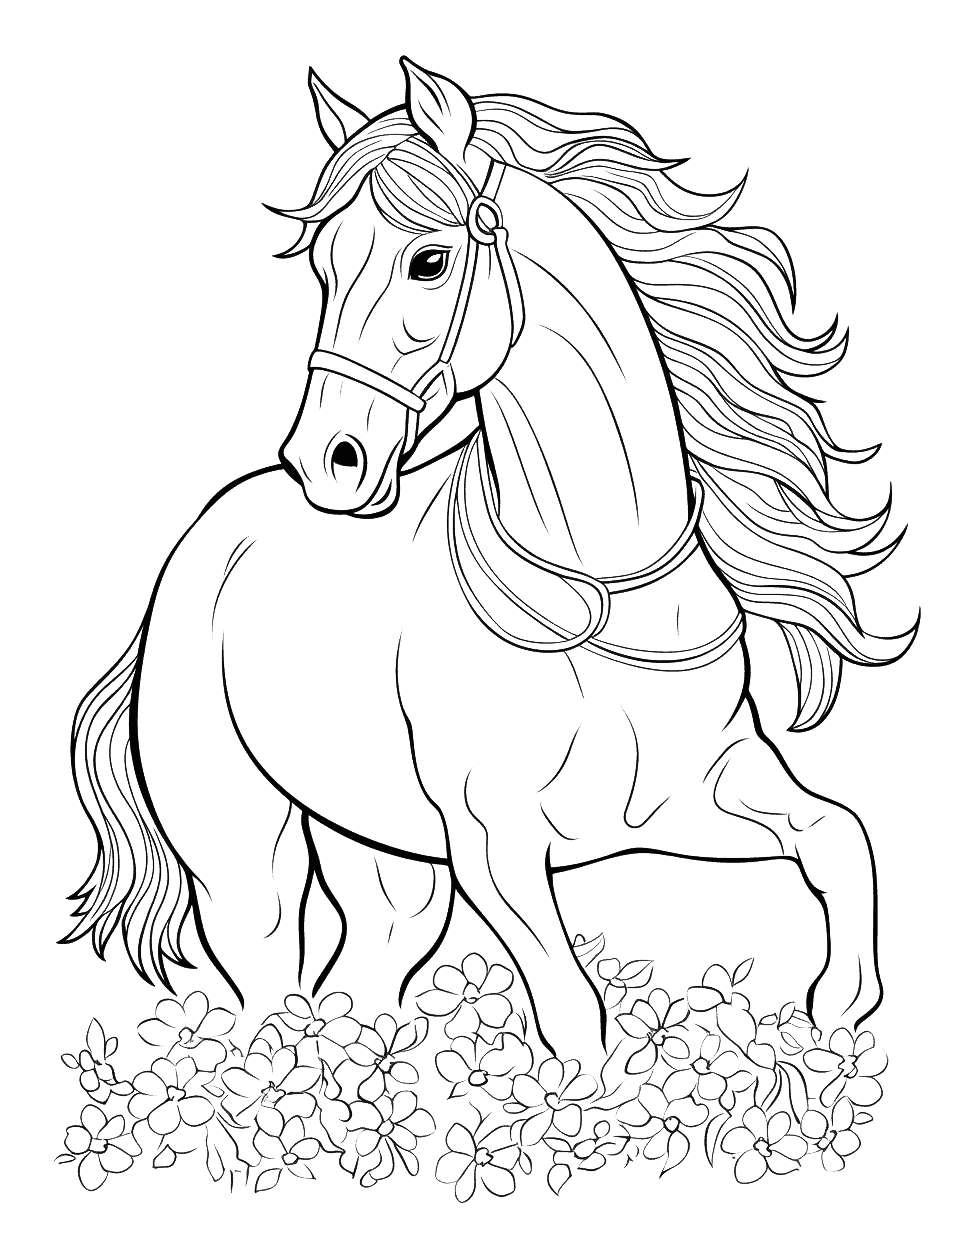 Full Page Wild Mustang Horse Coloring - A full-page, intricately drawn Mustang in its natural environment.